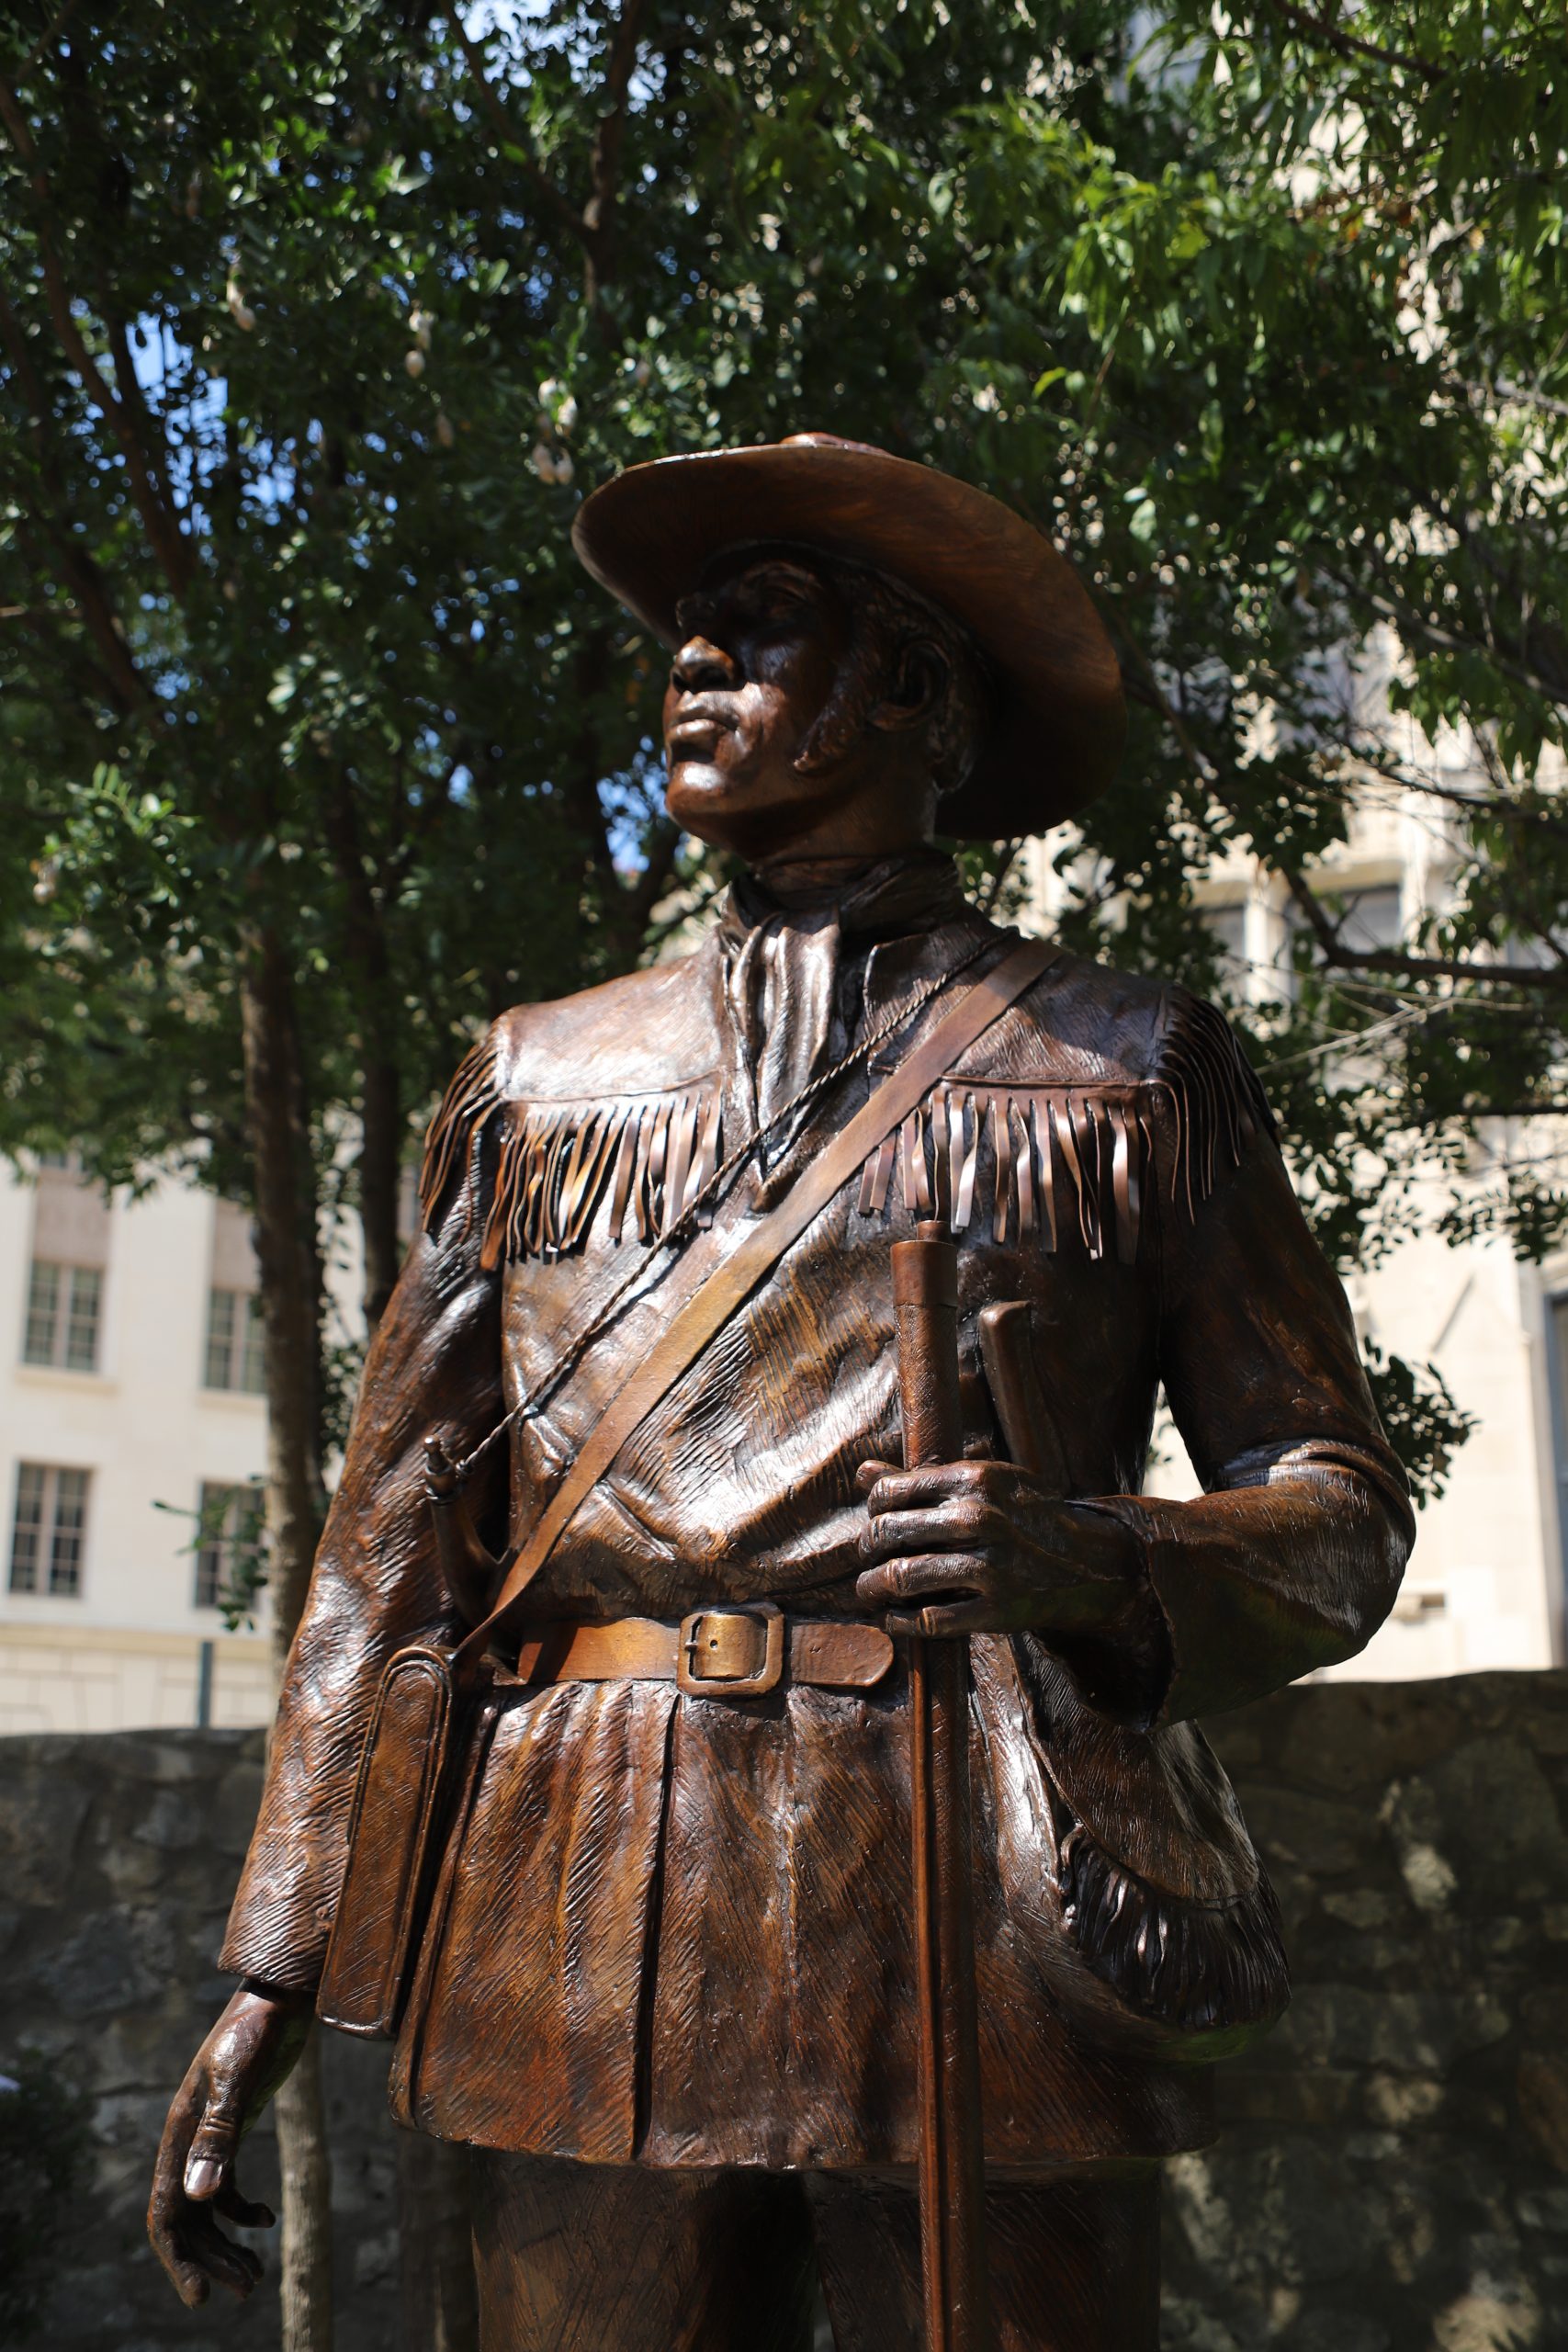 The statue of Hendrick Arnold, a guide and spy during the Texas Revolution, as seen from the hips up. The statuewas created by Colorado artist Ed Dwight. Photo courtesy of the Alamo Trust, Inc. 